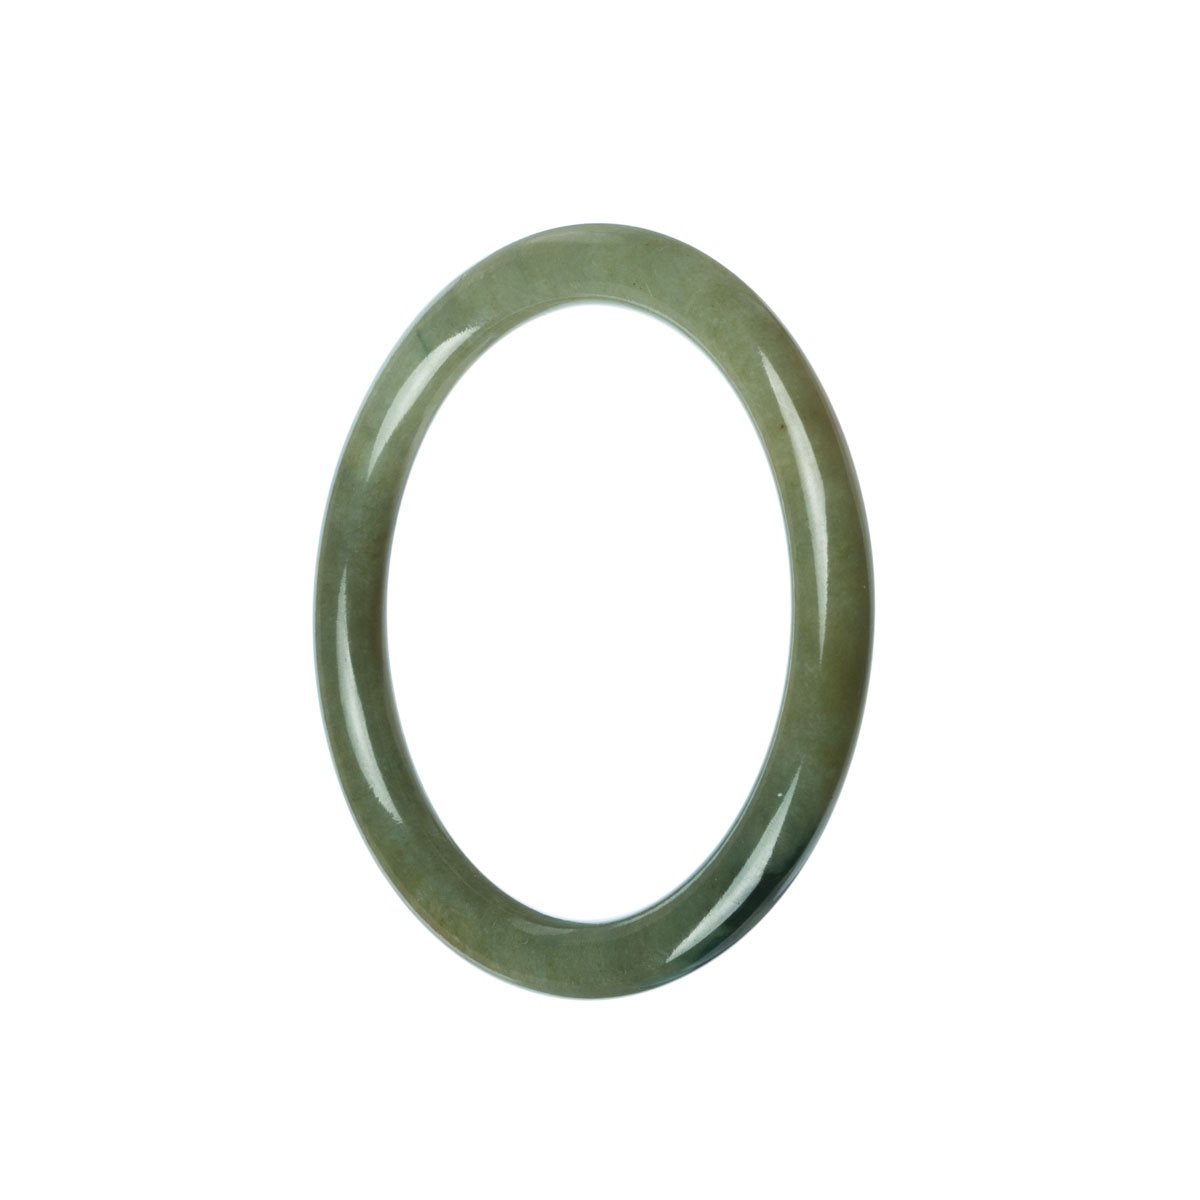 A close-up of a small, round green jadeite bangle bracelet with a Grade A certification. The bracelet is petite in size, measuring 55mm in diameter. It is a beautiful piece of jewelry from the MAYS™ collection.